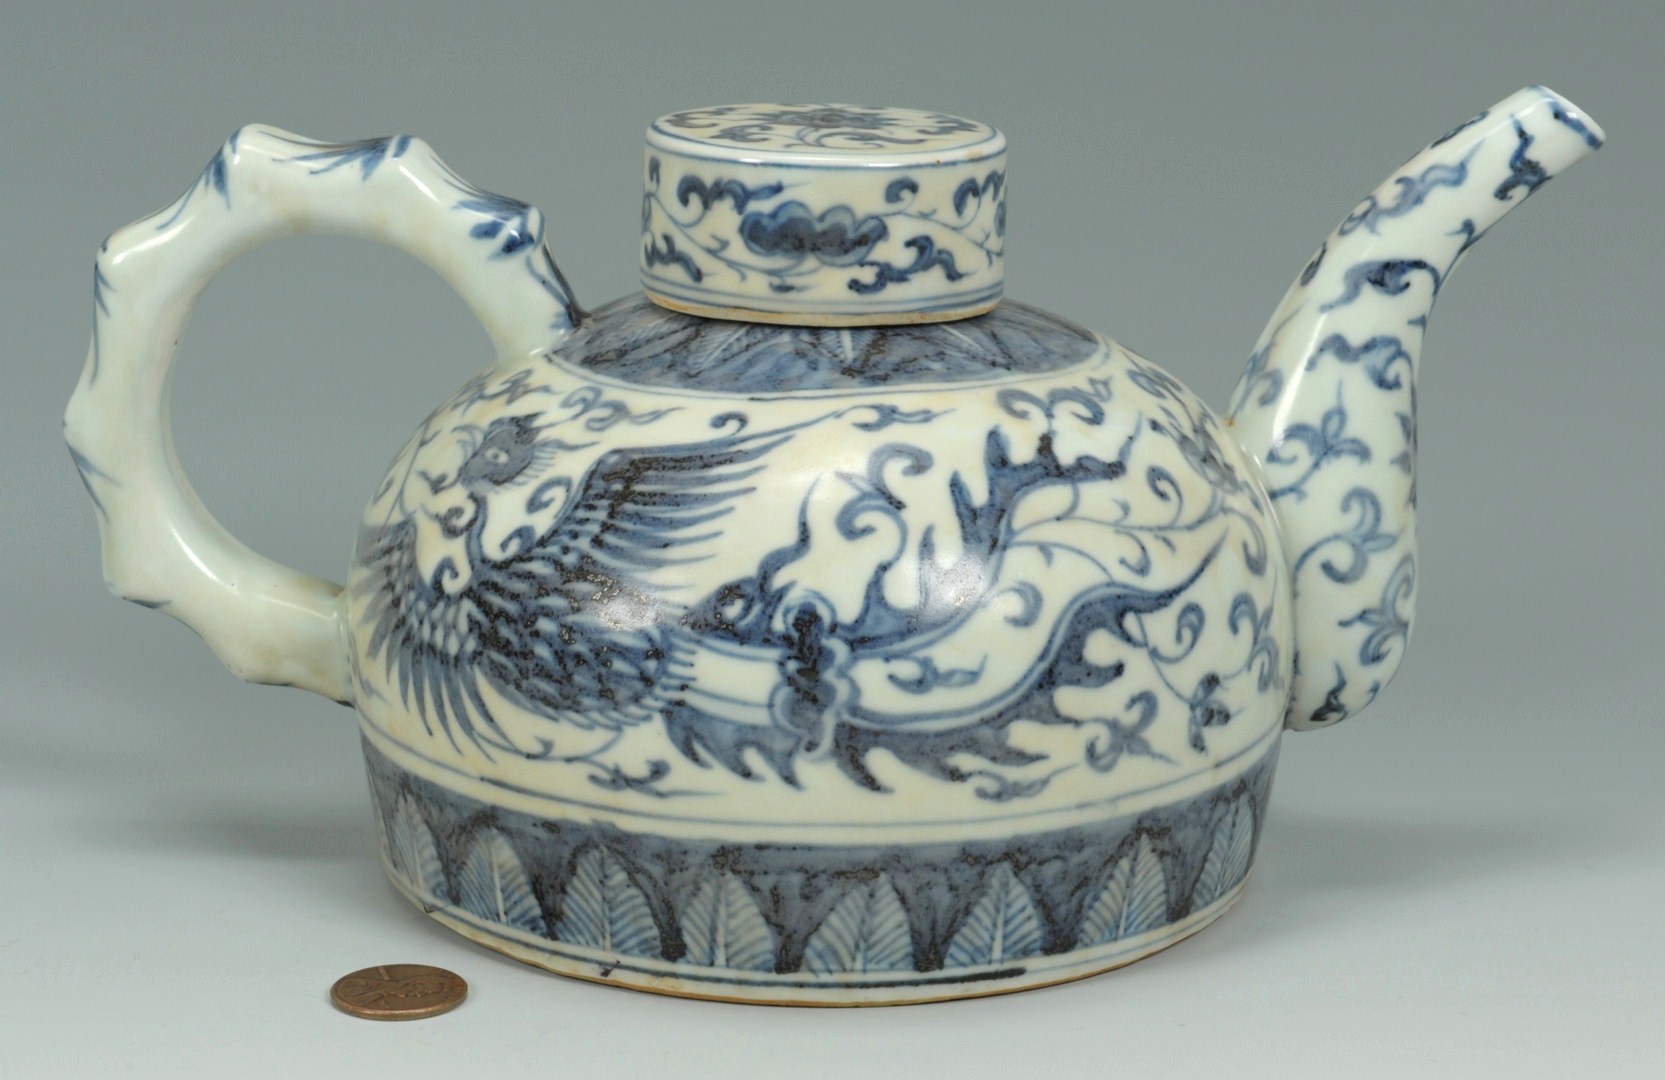 Lot 207: Chinese Export Blue and White Tea Pot